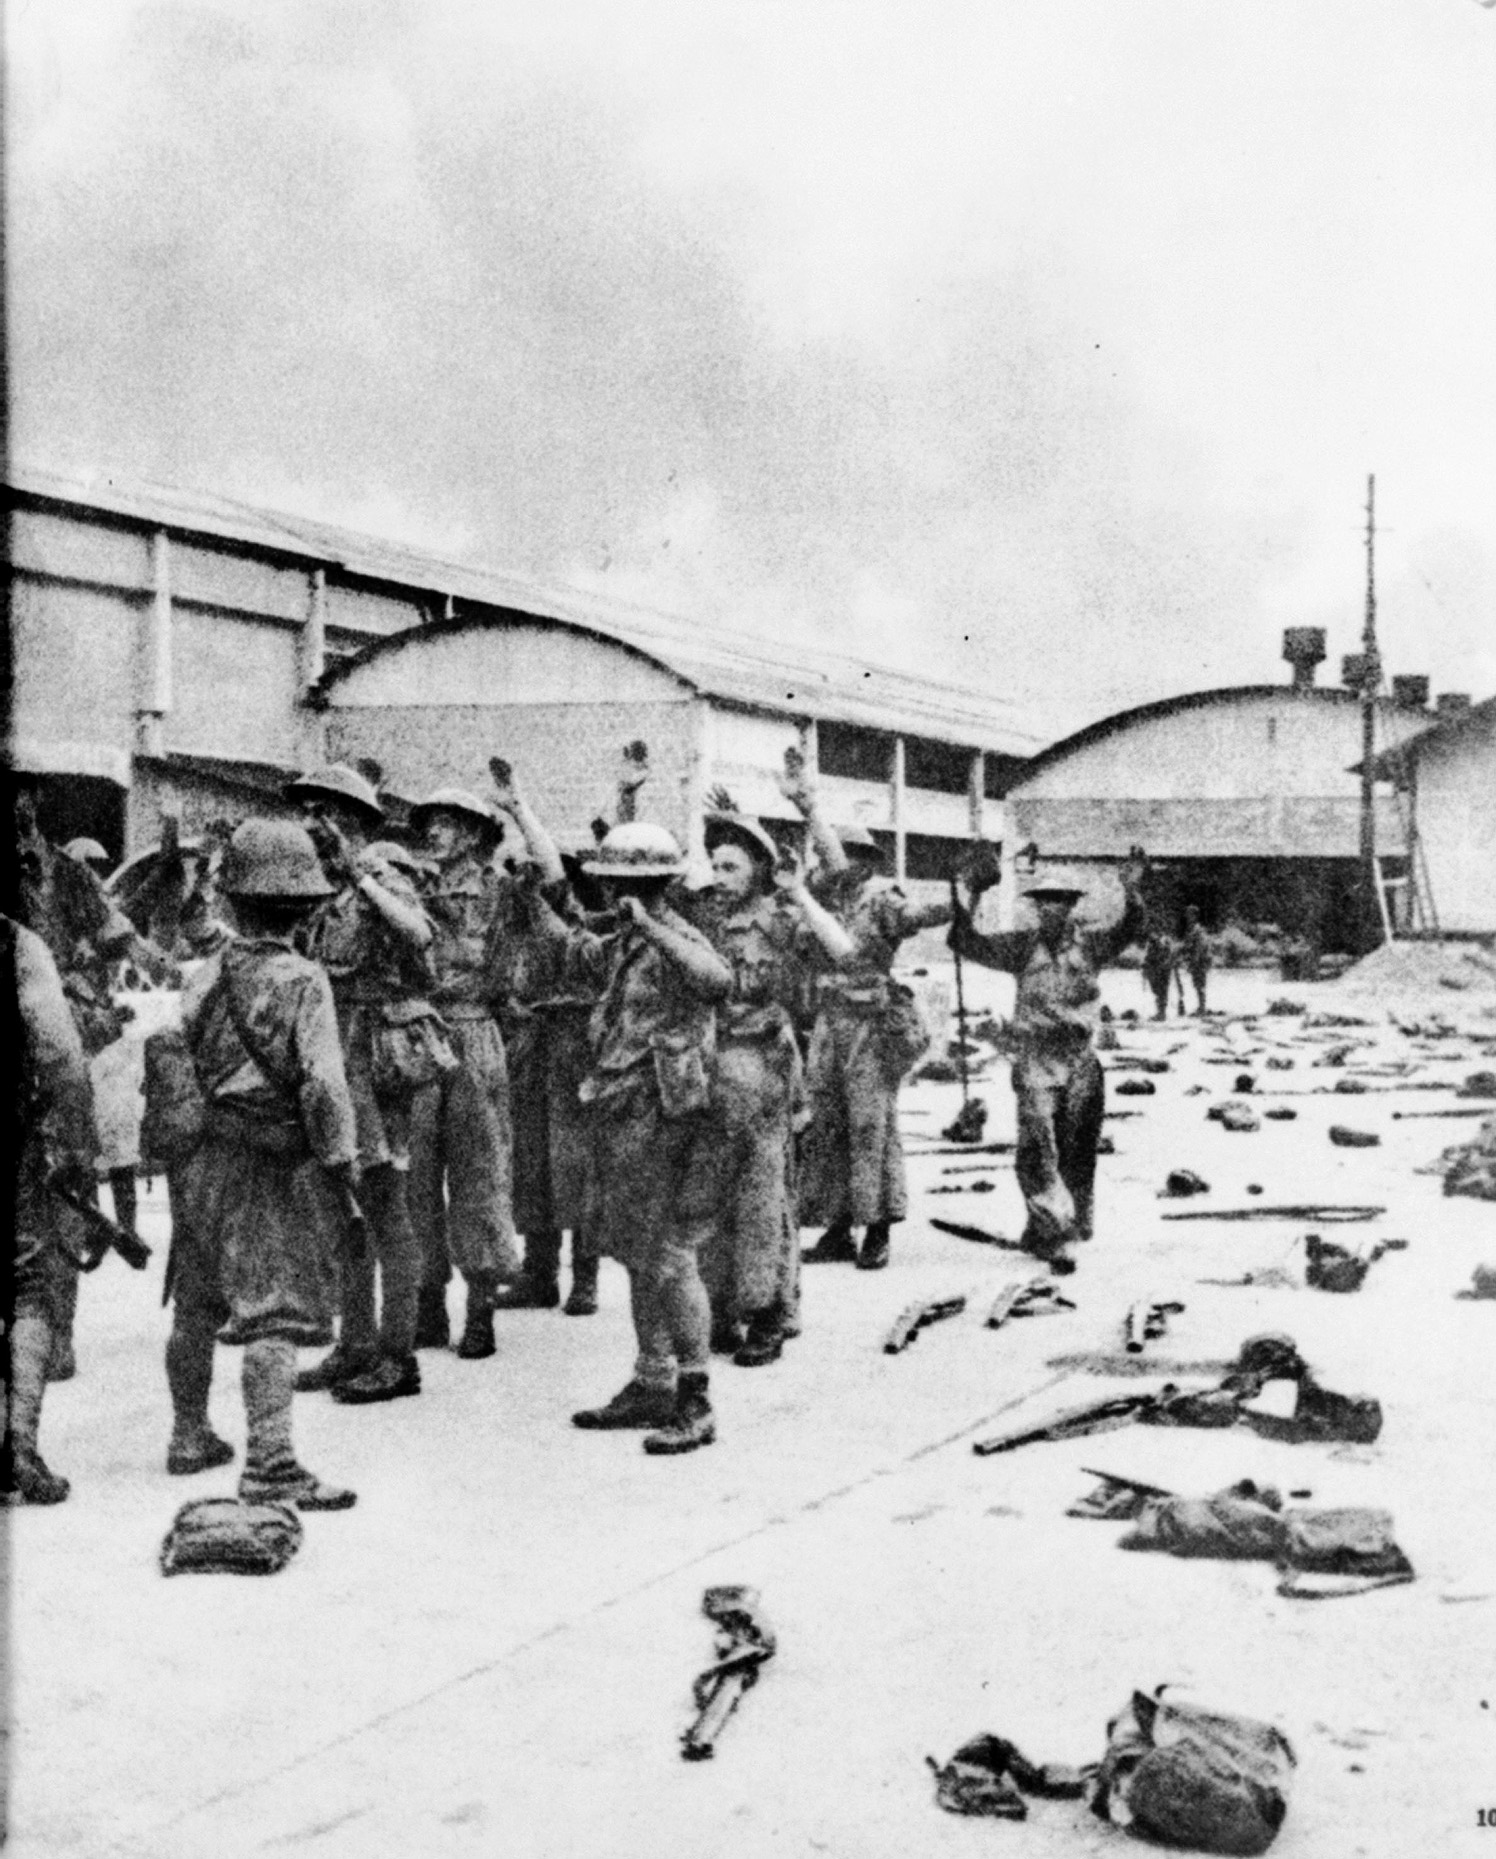 After their ignominious surrender at Singapore, British soldiers, their hands raised above their heads, are marched off into wretched captivity. Many of them did not survive, while others endured four years of harsh treatment at the hands of their Japanese captors.